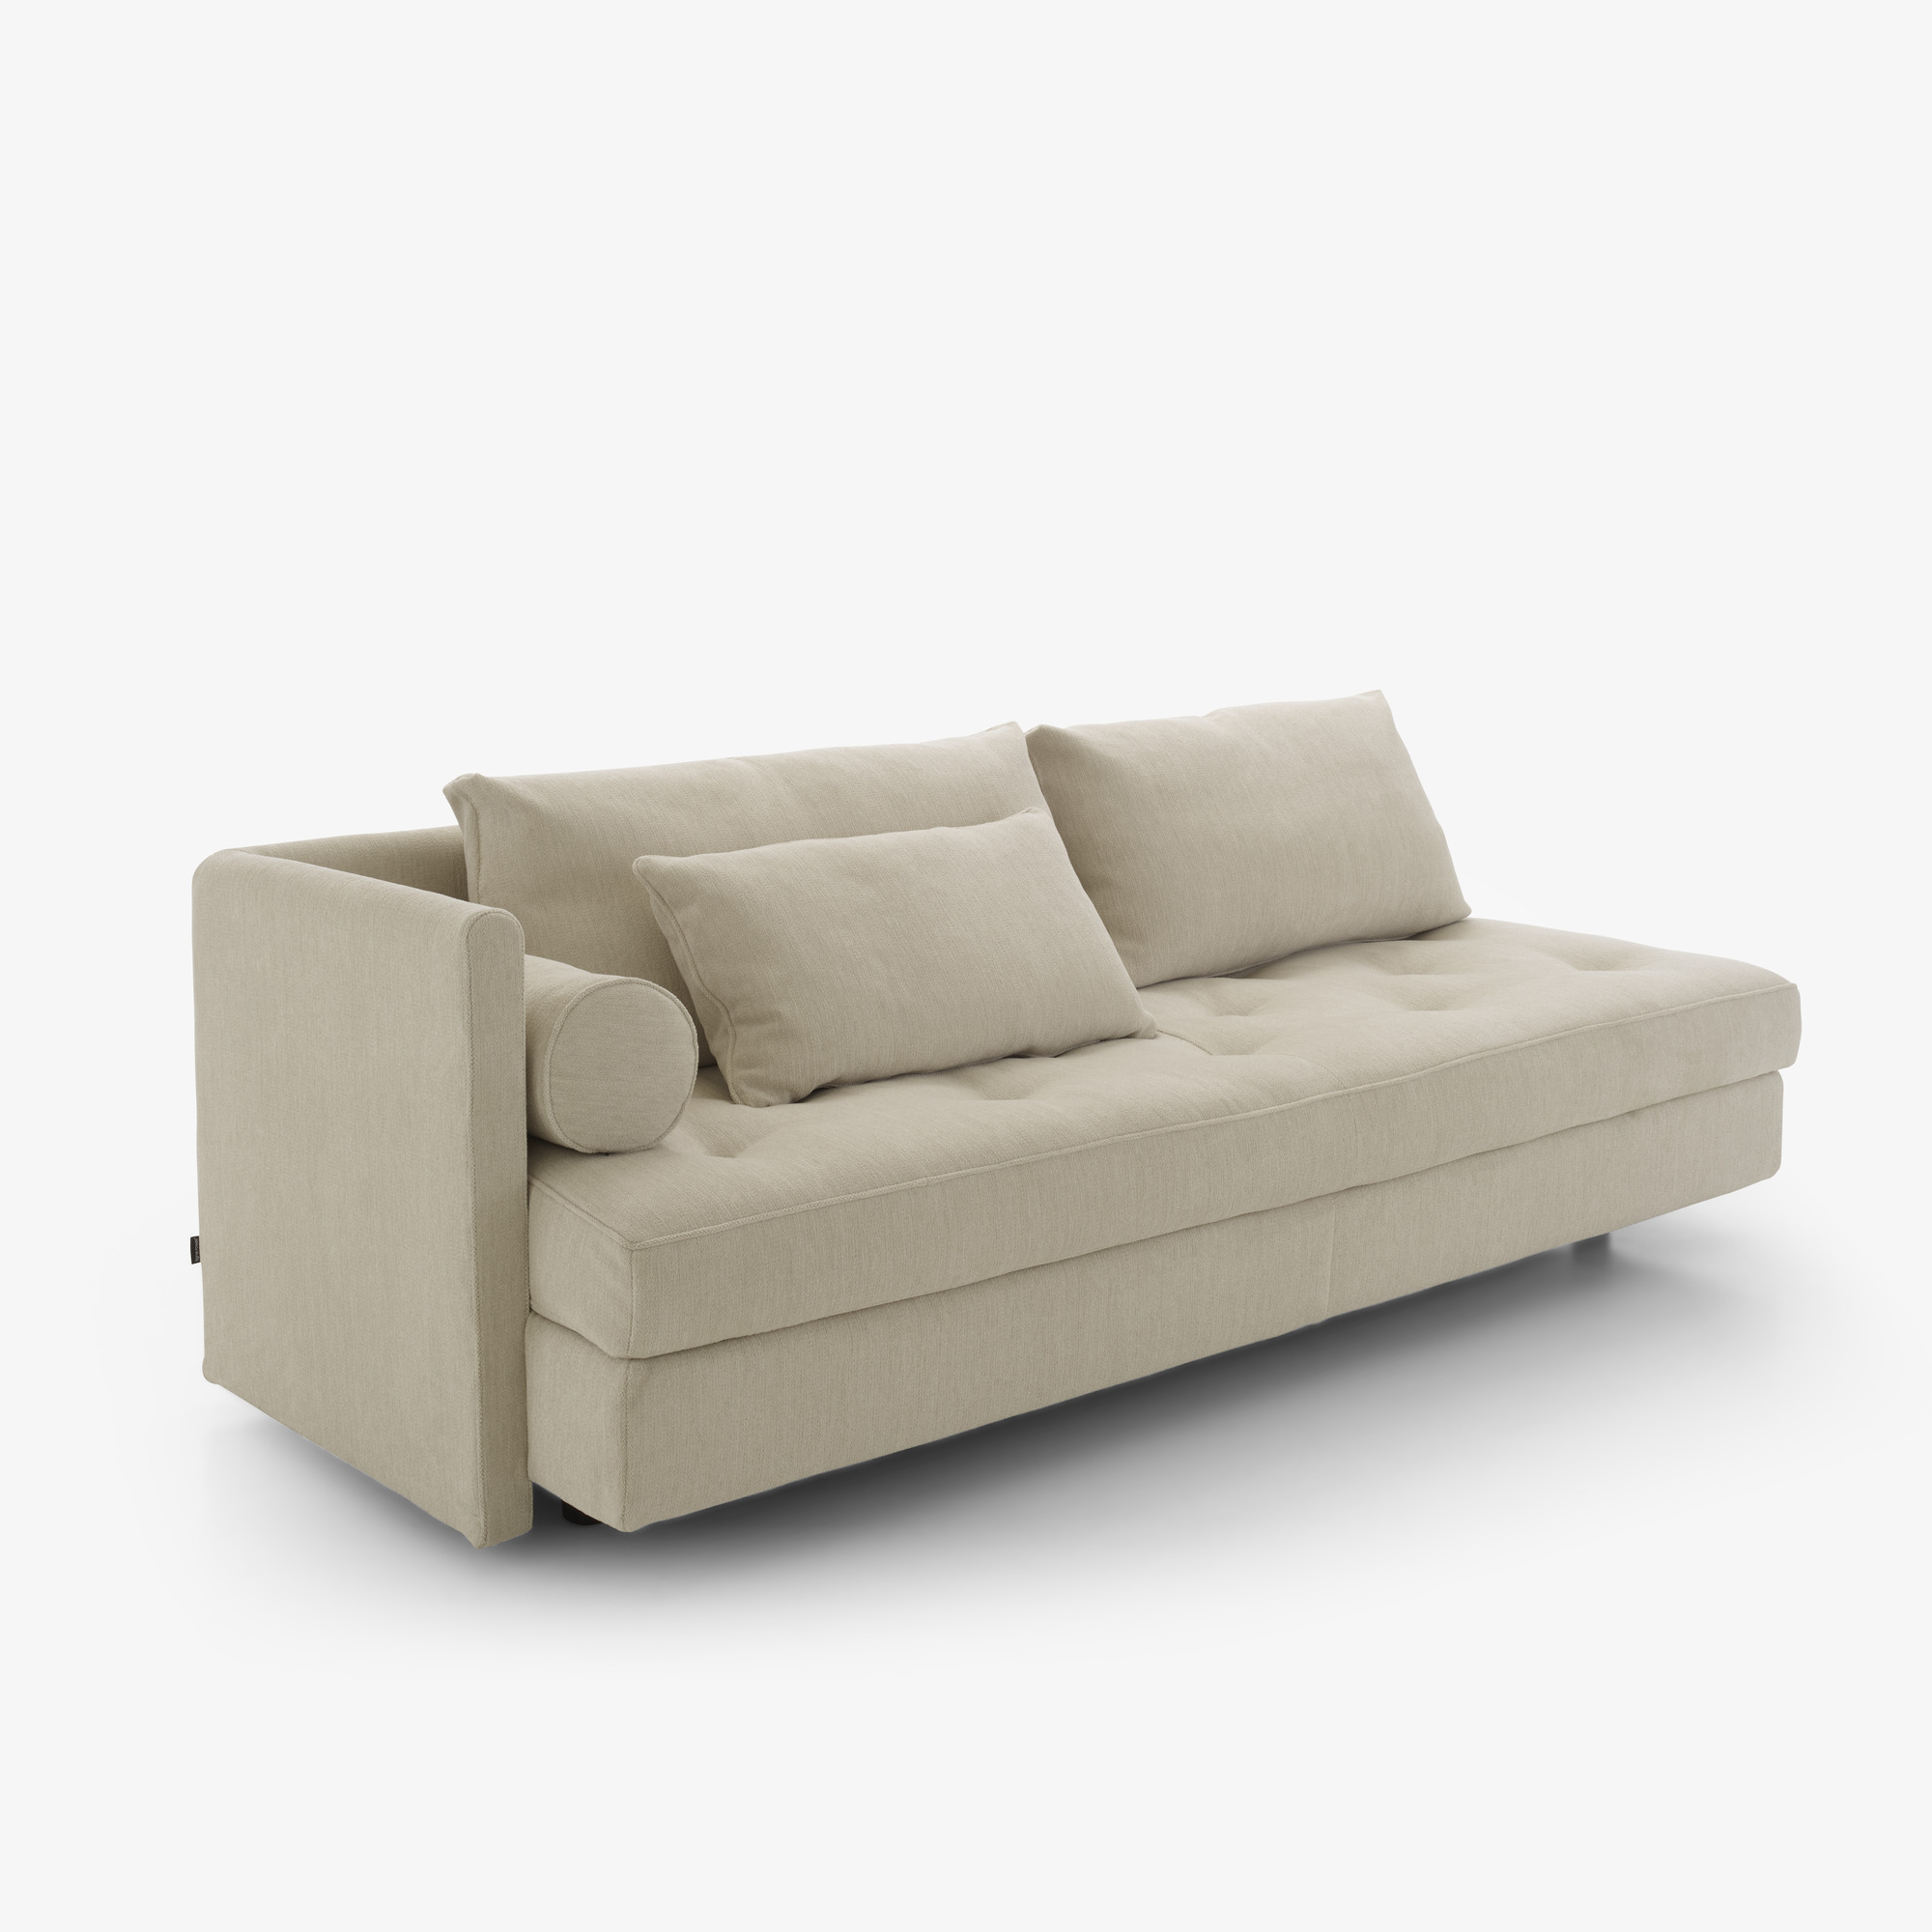 Image Large 1-armed settee 2